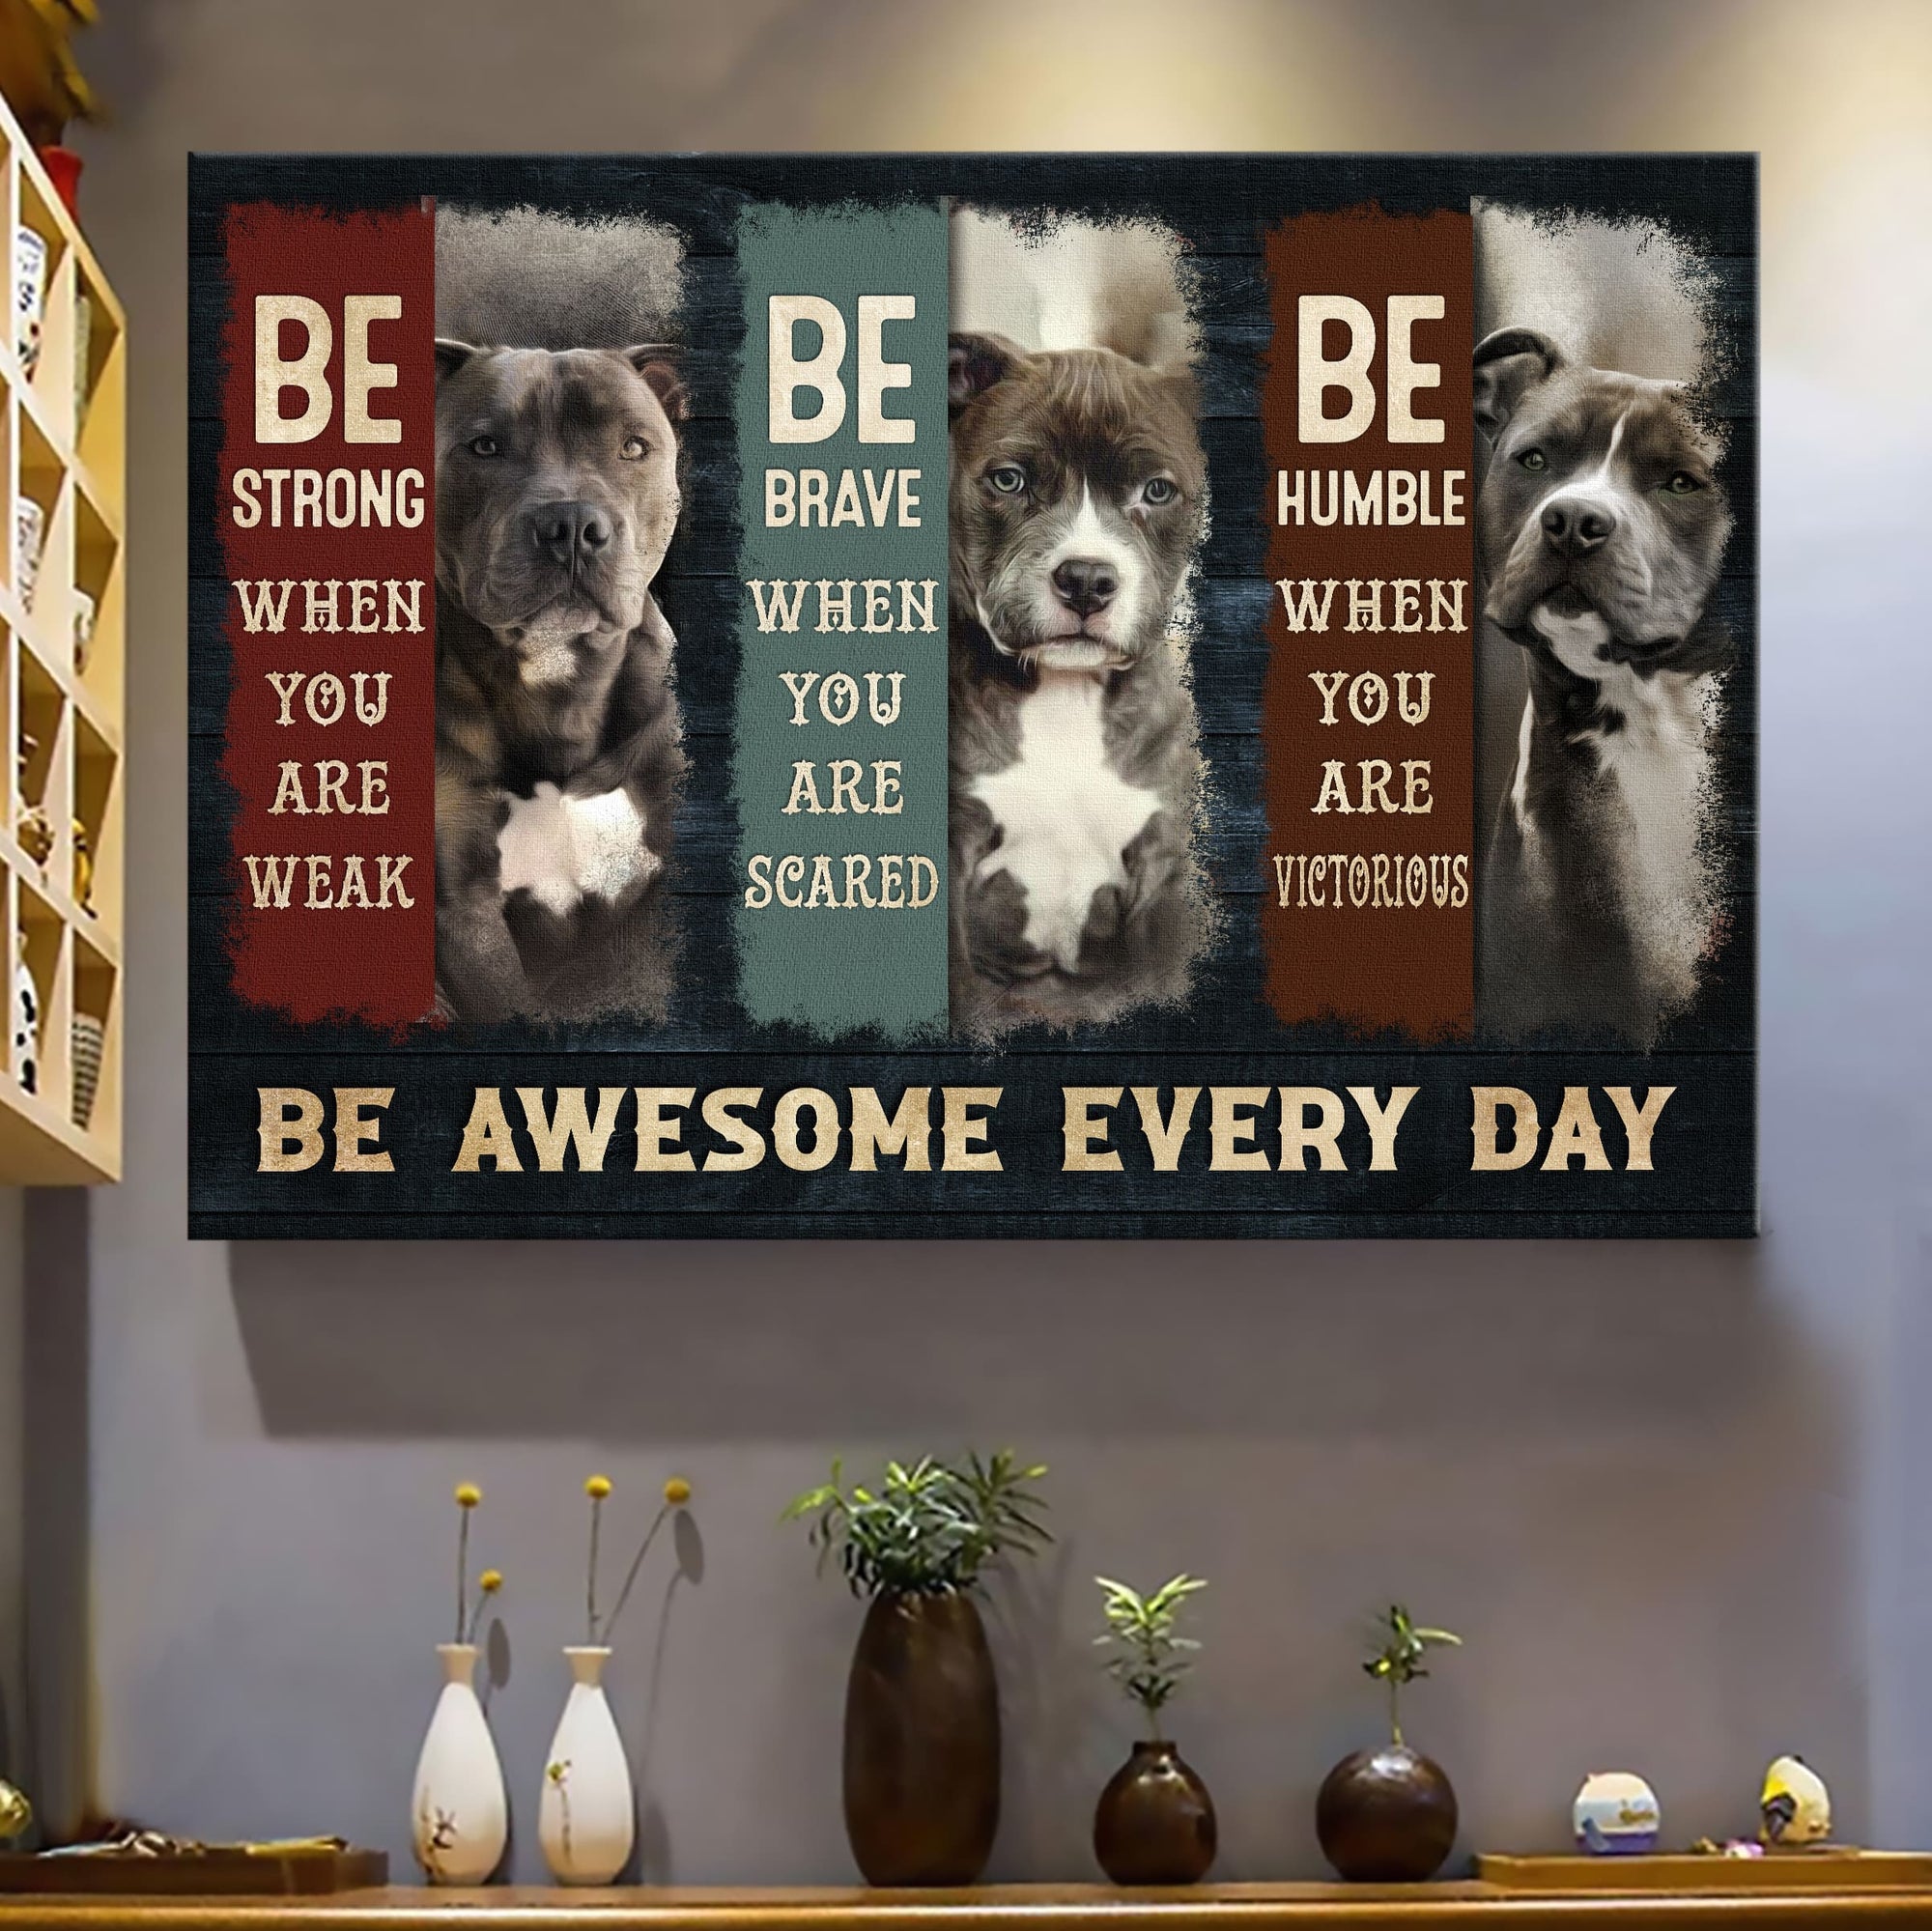 Amazing Pit bull, Be awesome every day - Pit bull Landscape Canvas Prints, Wall Art